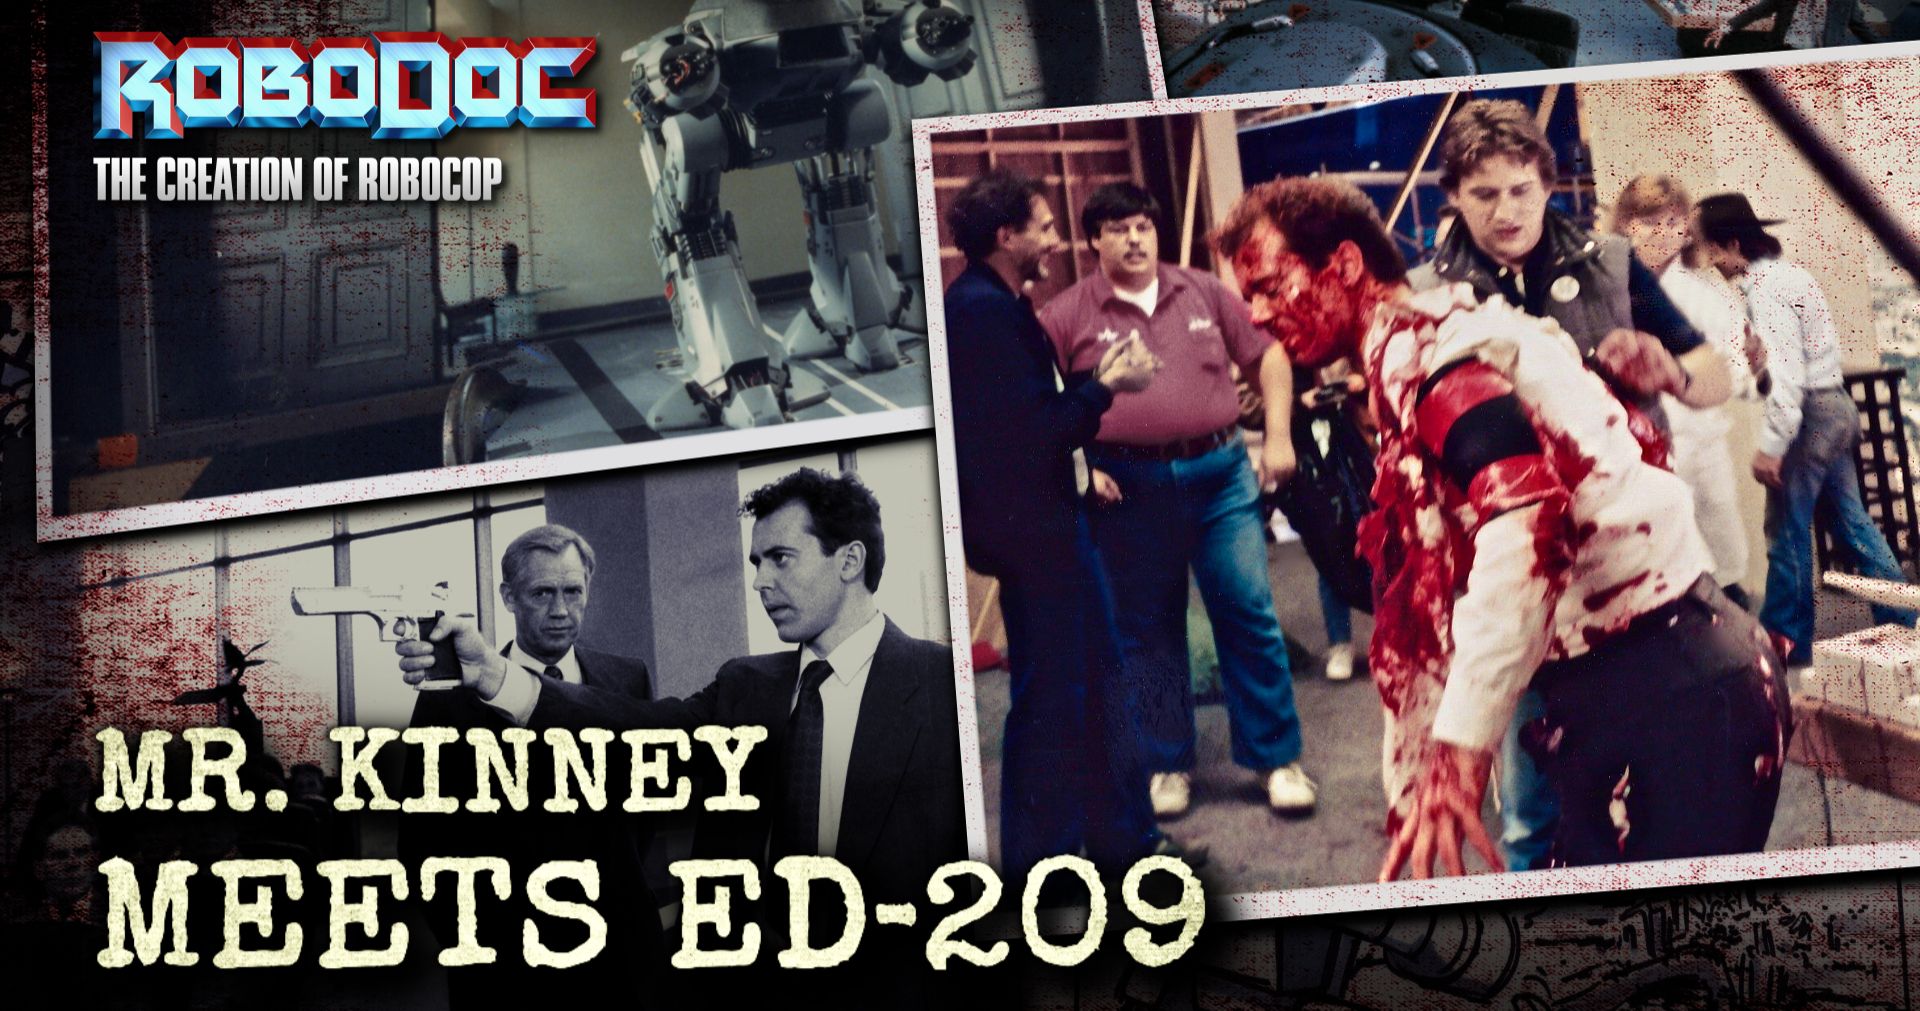 Mr. Kinney Meets ED-209 in a 19-Minute Preview of RoboDoc: The Creation of RoboCop [EXCLUSIVE]